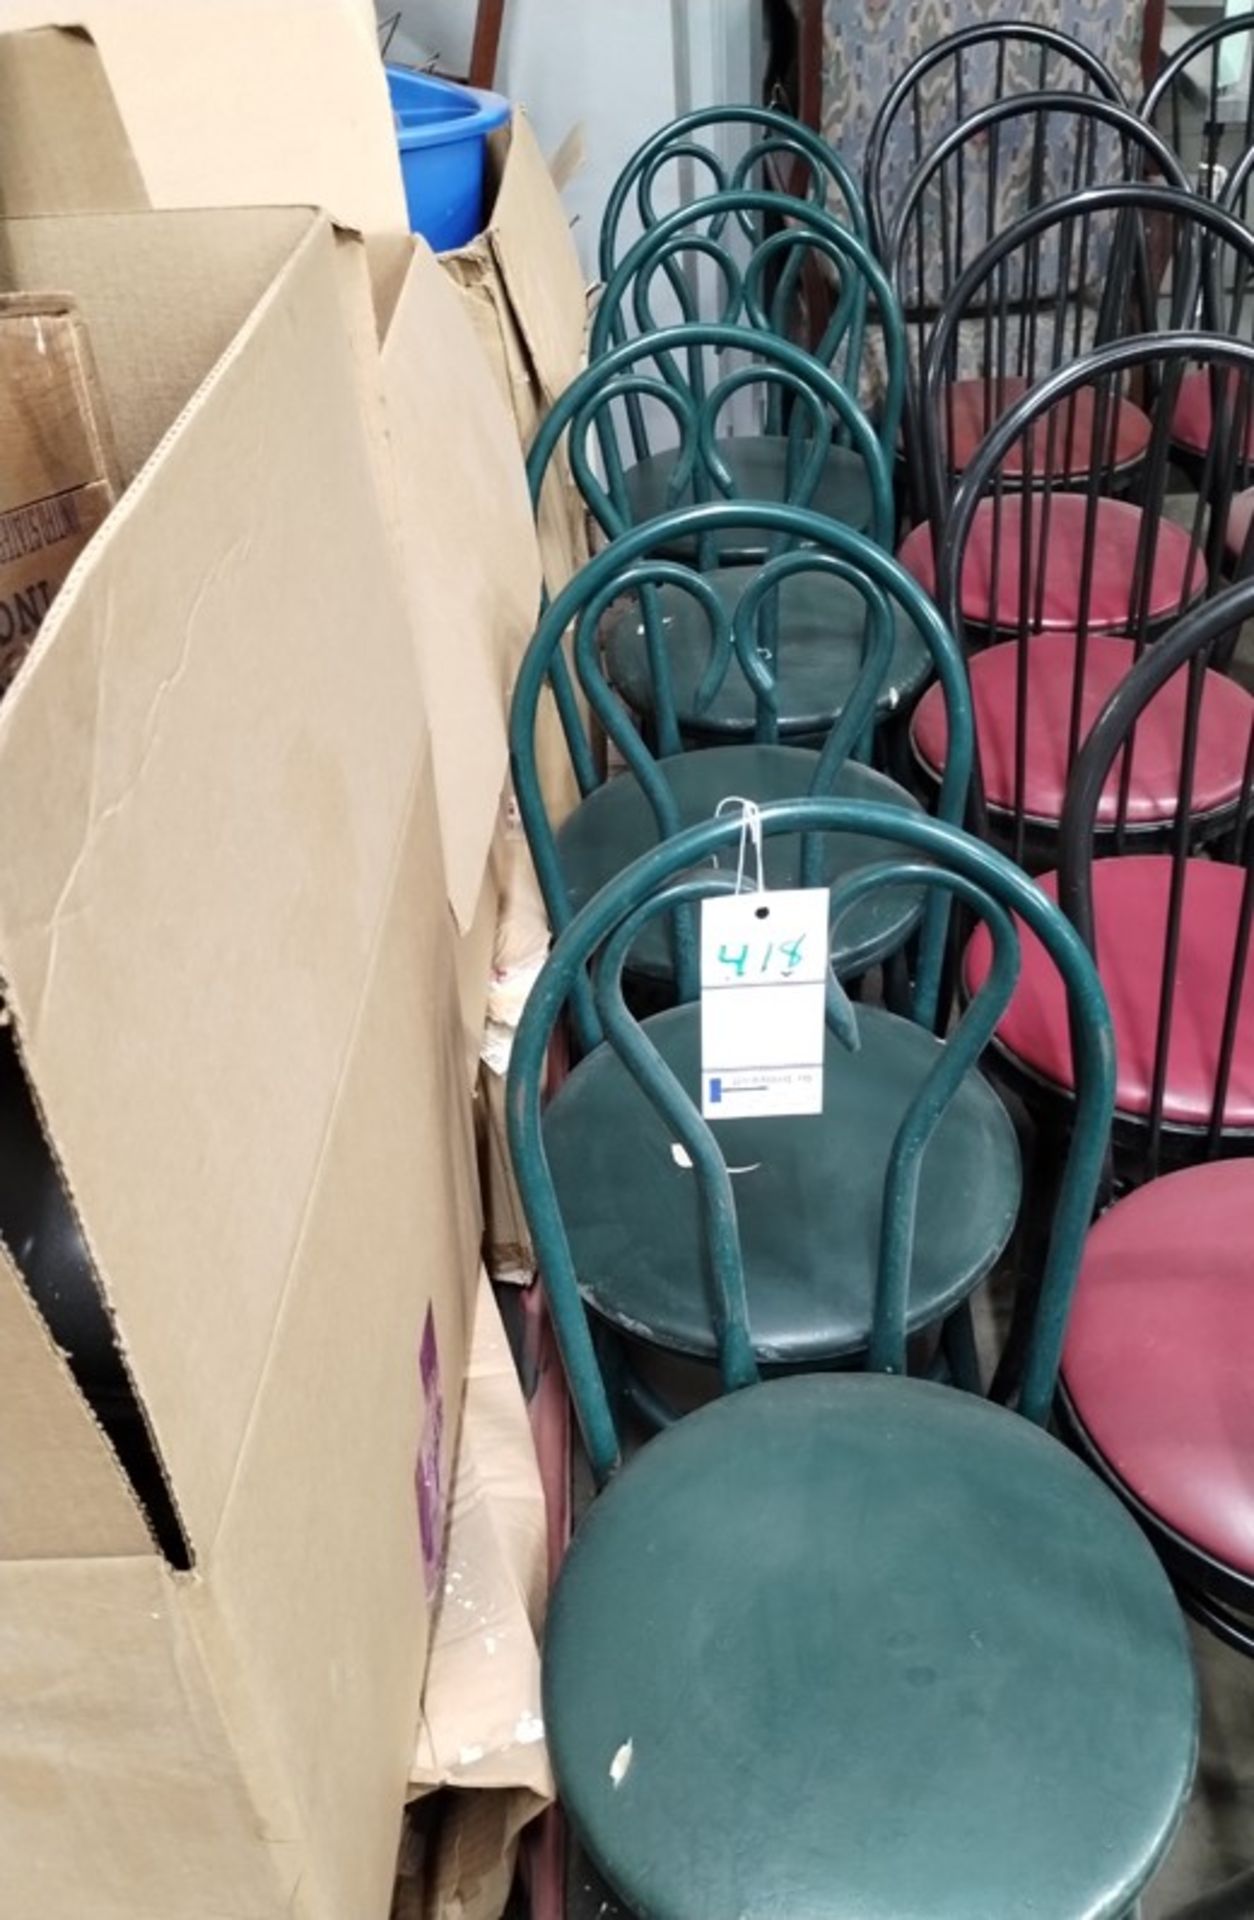 5 RESTAURANT CHAIRS - GREEN WITH METAL FRAME